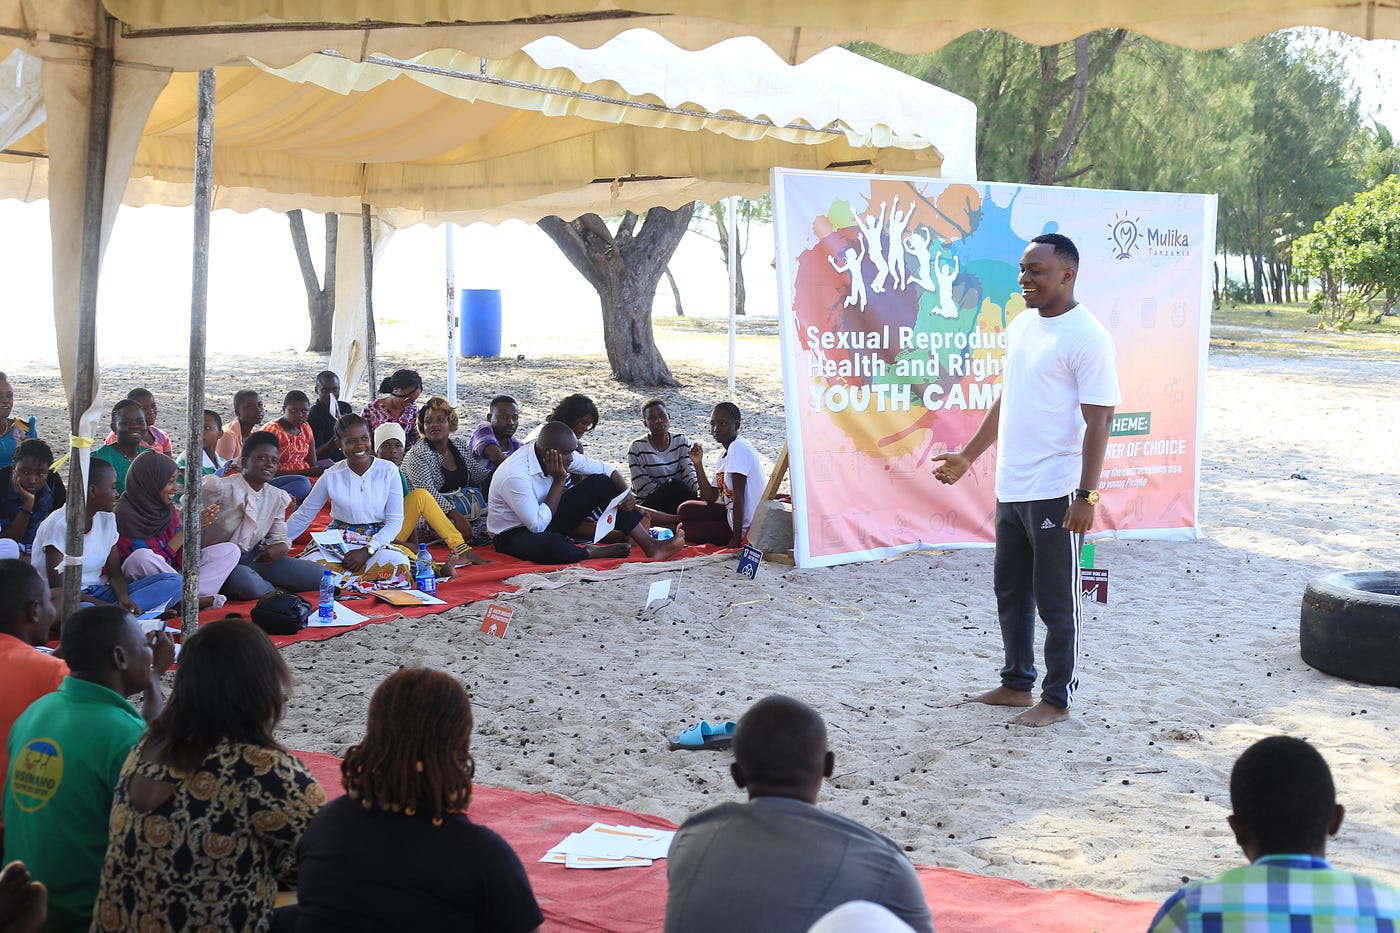 The Sexual Reproductive Health and Rights (SRHR) Youth Camp by Mulika Tanzania Medium photo